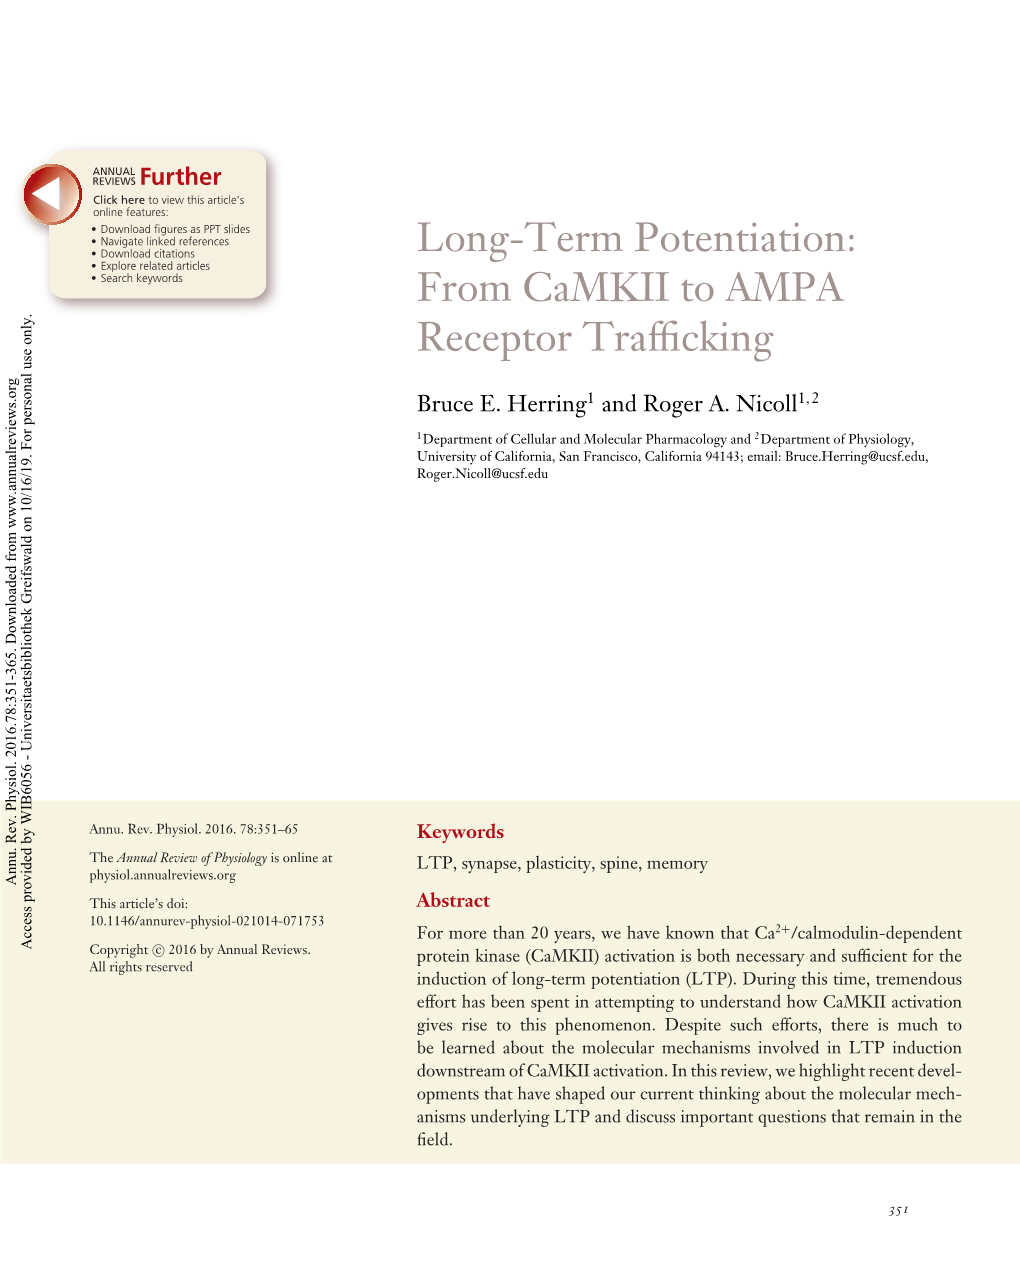 Long-Term Potentiation: from Camkii to AMPA Receptor Trafficking